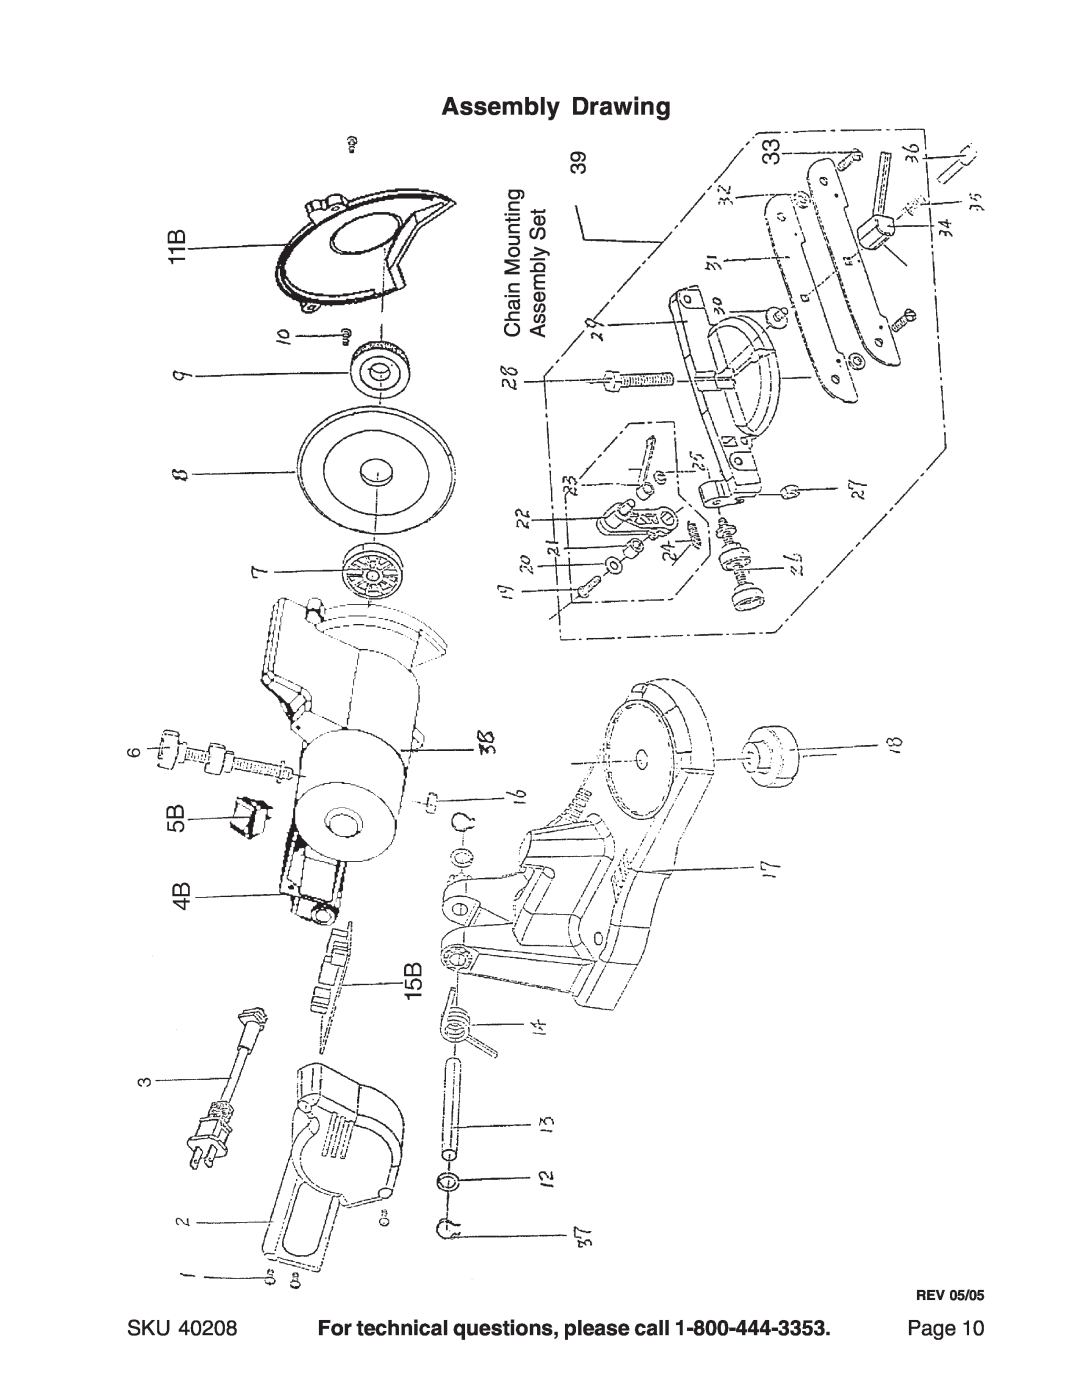 Harbor Freight Tools 40208 manual Assembly Drawing, Chain Mounting Assembly Set, For technical questions, please call, Page 